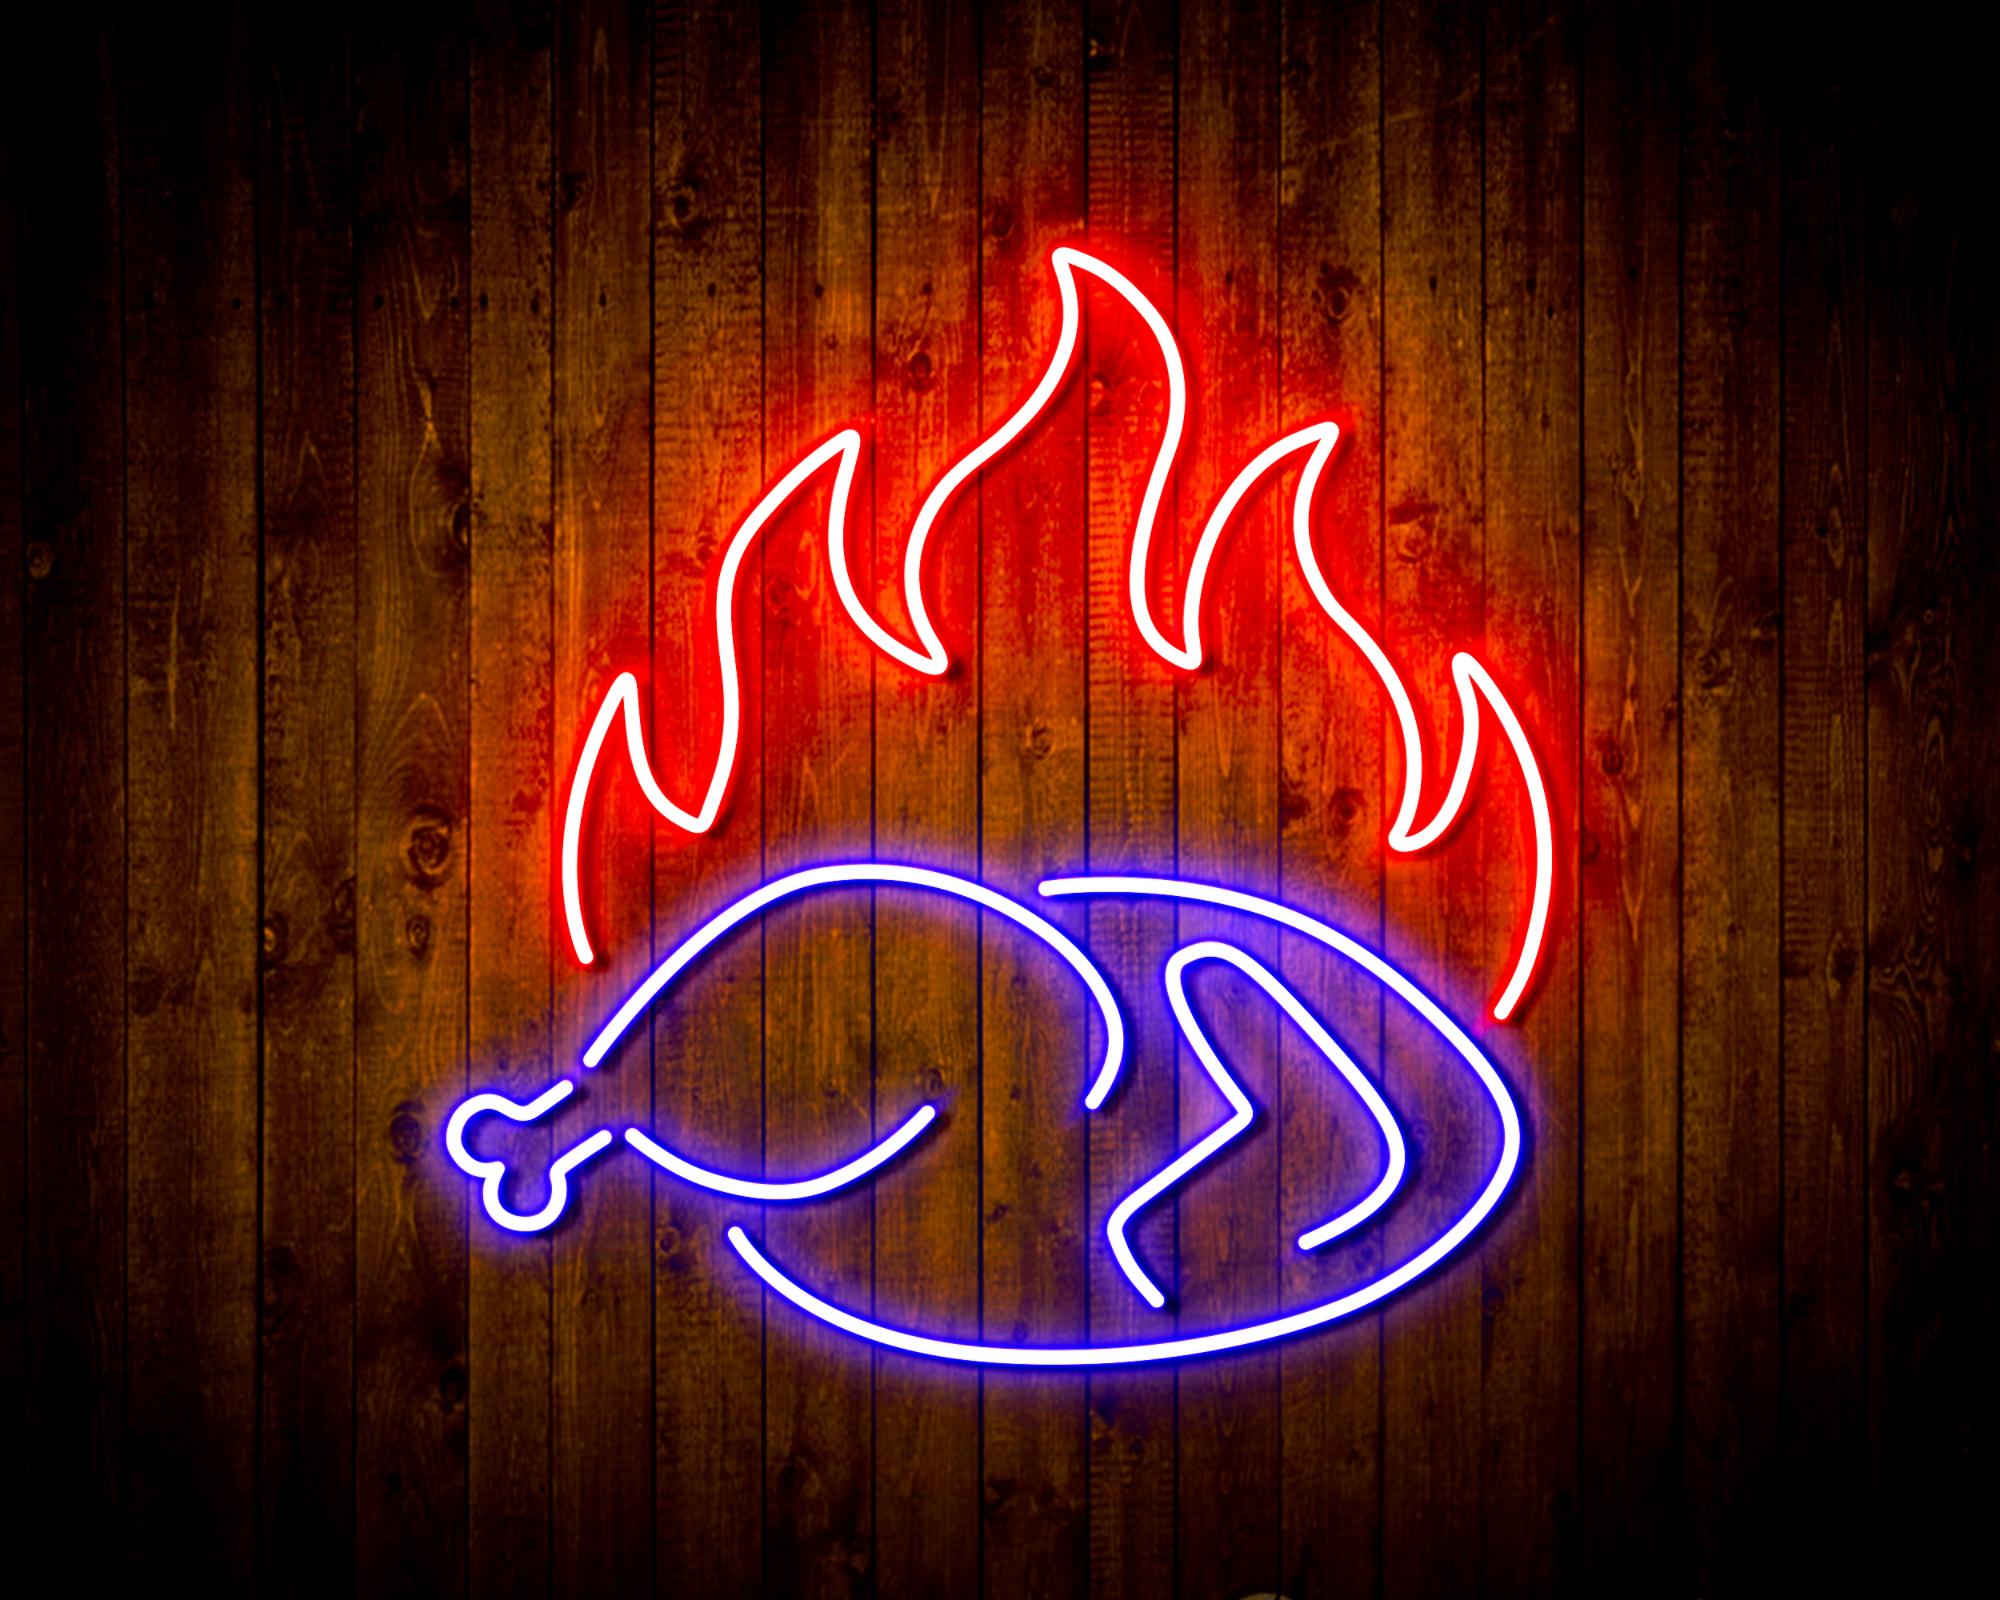 Chicken Shop Restaurant with Flame LED Neon Sign Wall Light